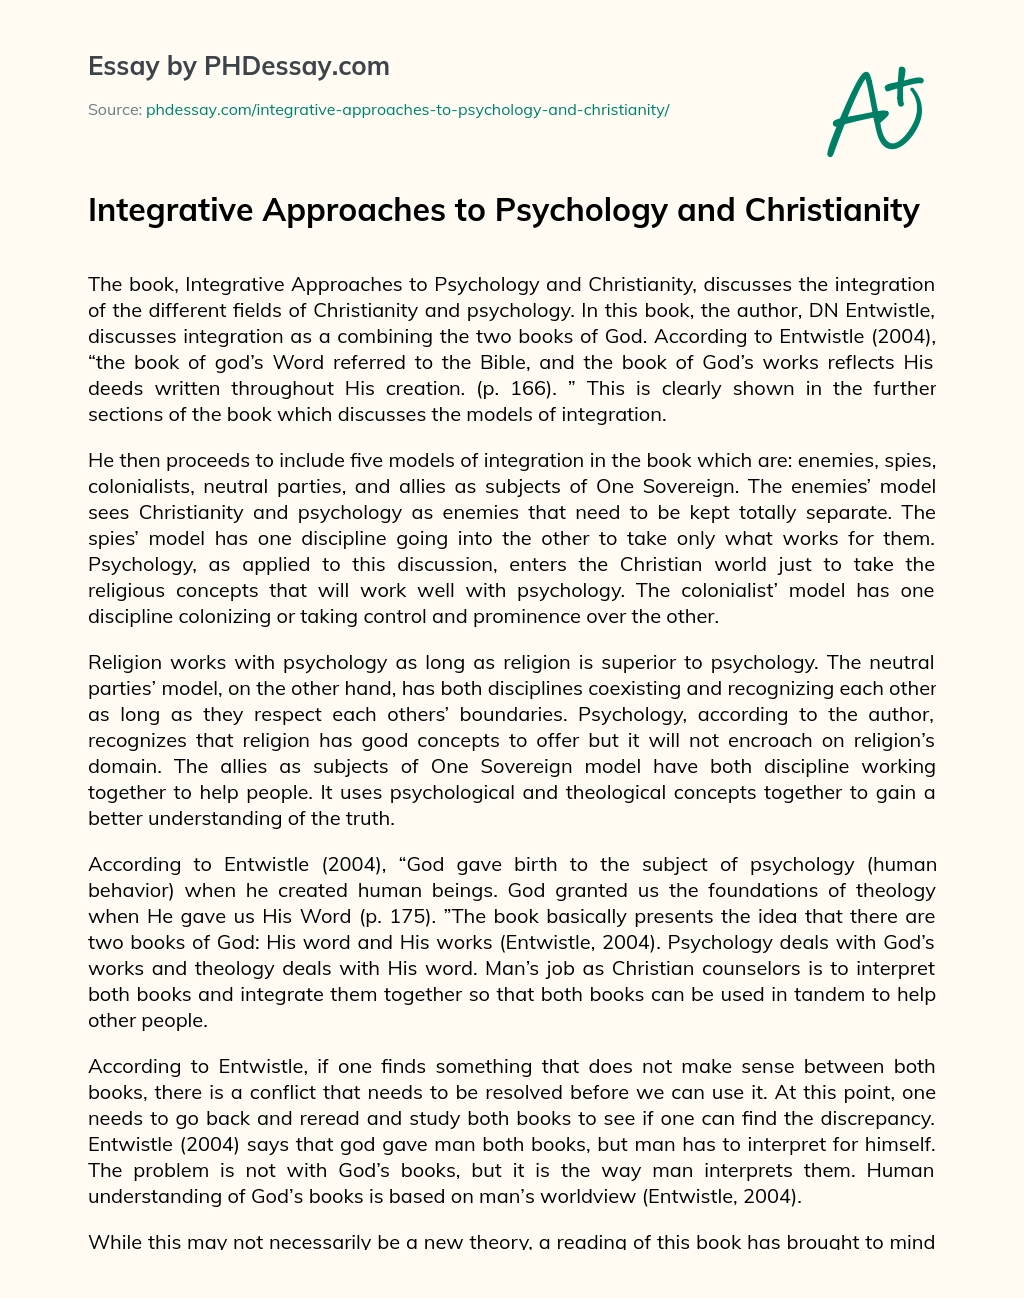 Integrative Approaches to Psychology and Christianity essay